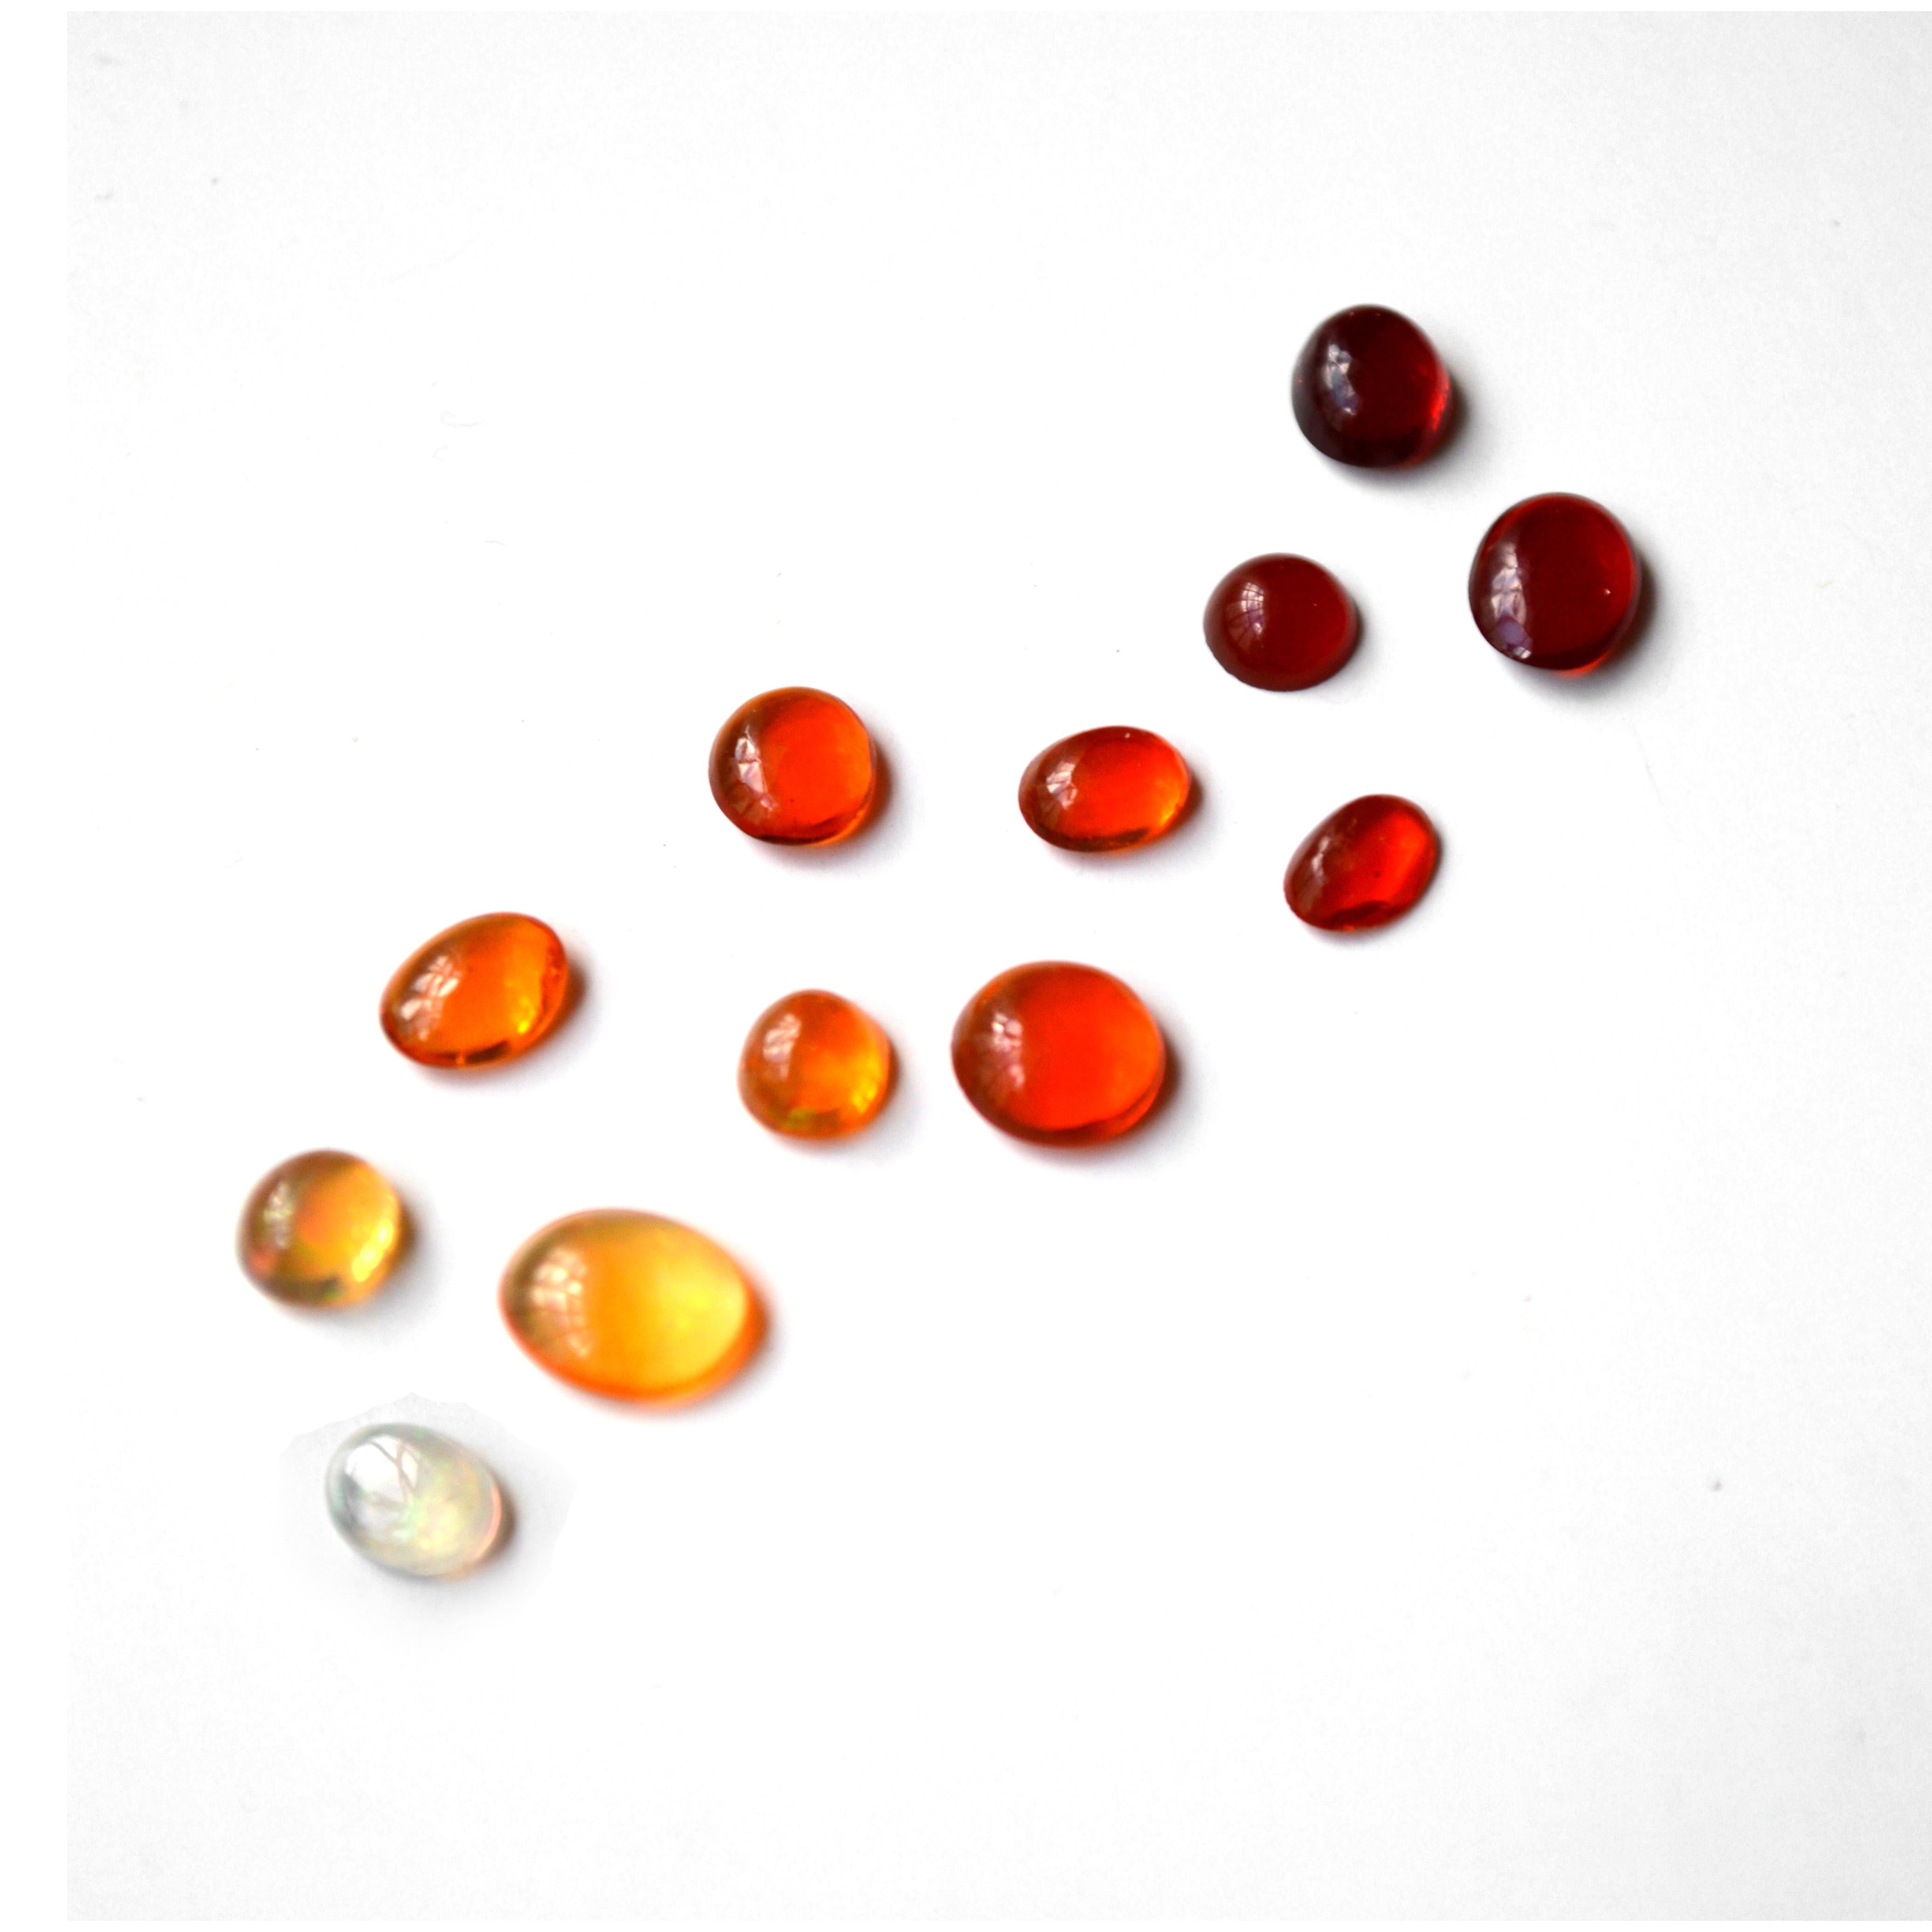 Lot of Loose Gemstones (12 pieces)
5.60 Carat in total 
Cabochon cut stones
Fire Opal
Different colored opals, ranging from red, orange and yellow.

The biggest stone has the dimentions:
6.5 x 8 x 2.3 mm 
The smallest stone has the dimentions:
4.2 x